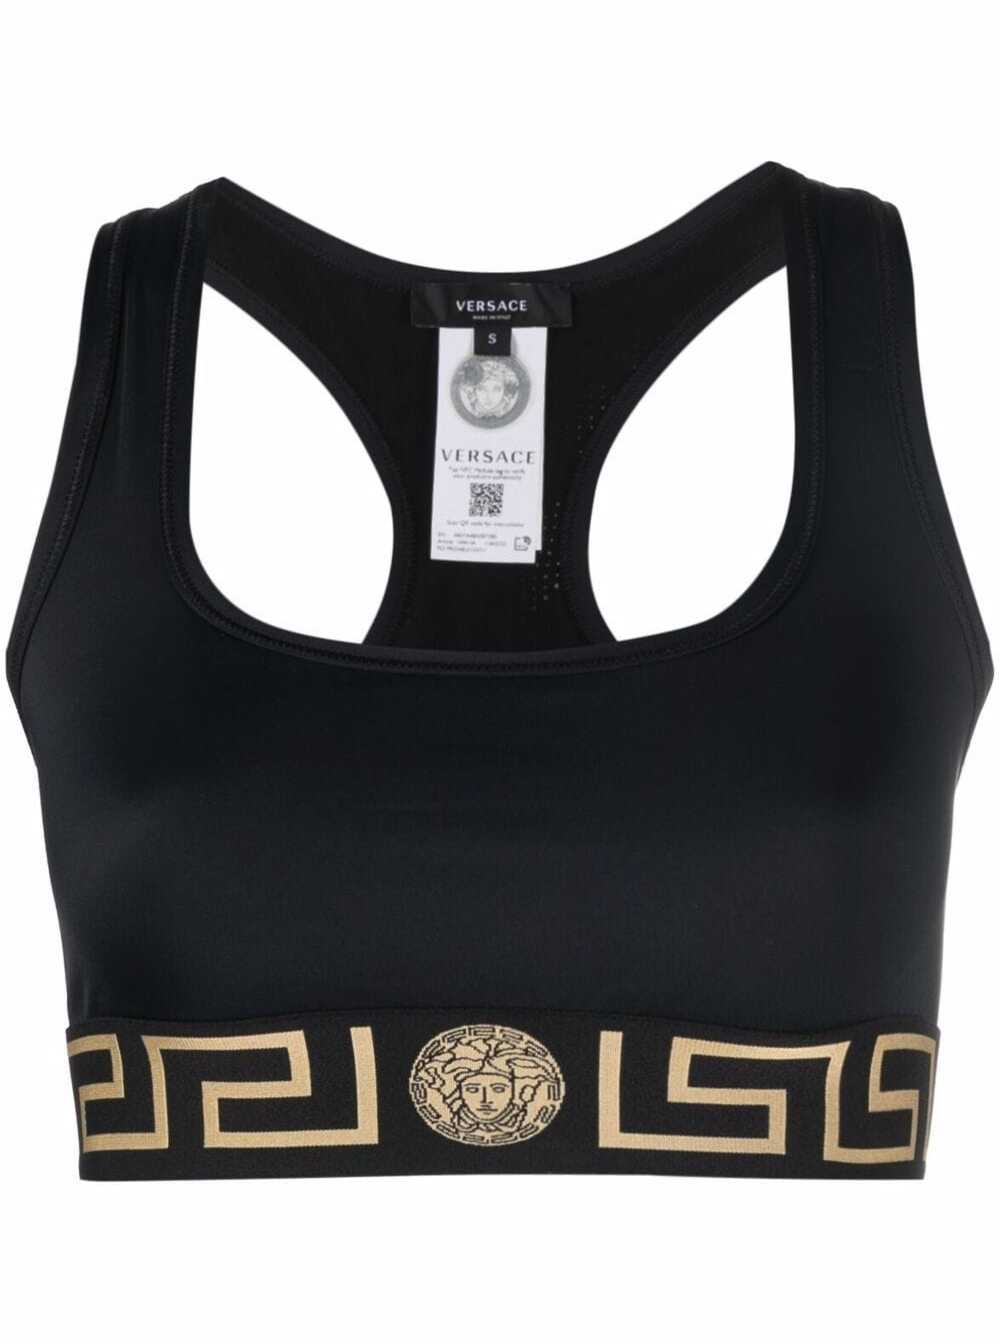 VERSACE VERSACE WOMENS BLACK STRETCH FABRIC TOP WITH LOGO